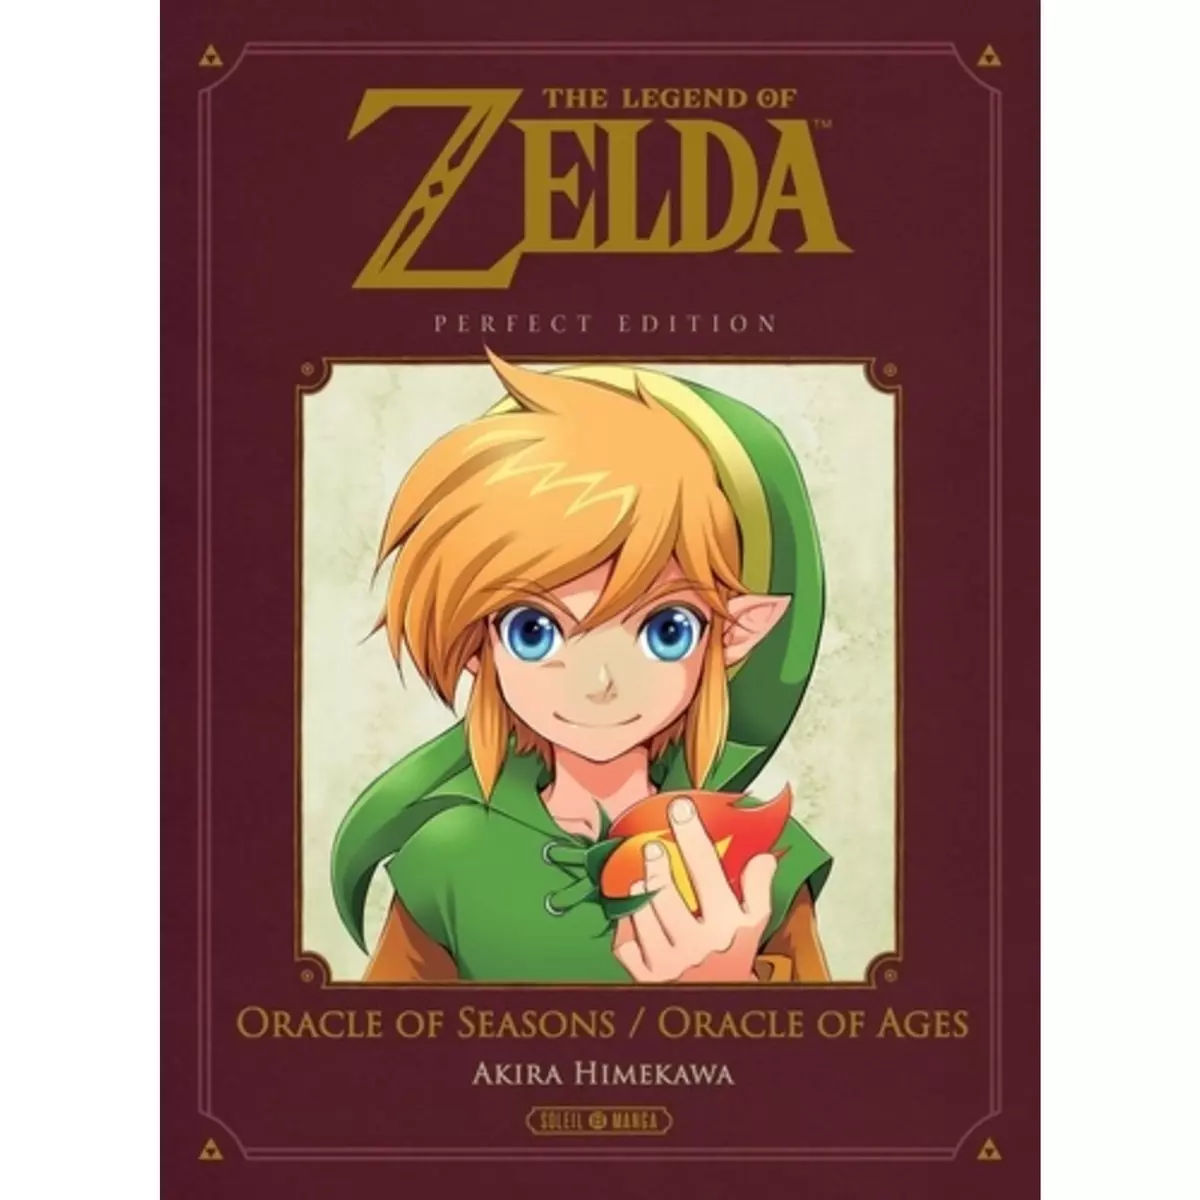  THE LEGEND OF ZELDA : ORACLE OF SEASONS/ORACLE OF AGES. PERFECT EDITION, EDITION DE LUXE, Himekawa Akira